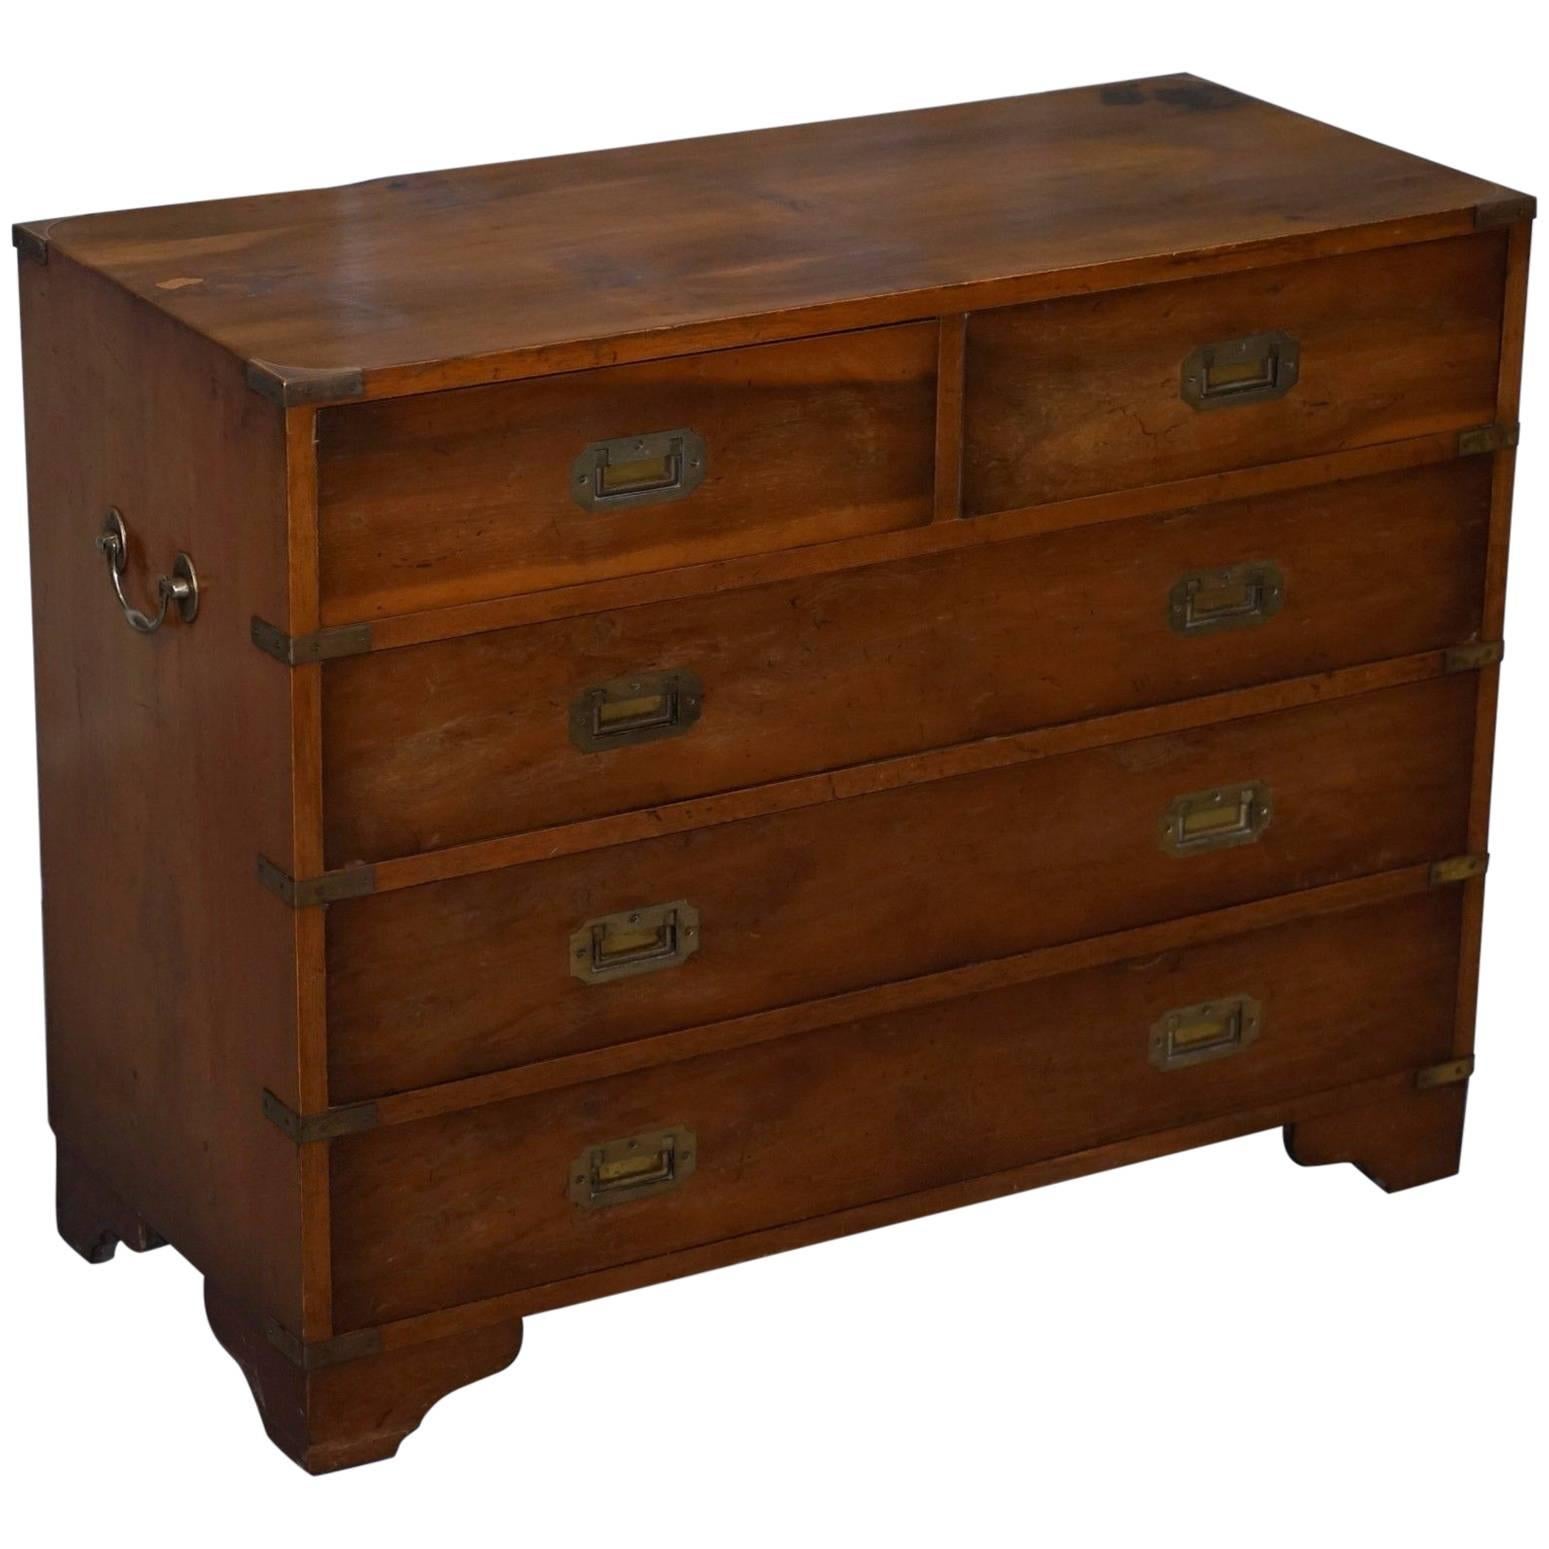 Yew Wood Veneer Military Campaign Chest of Drawers with Brass Fittings & Handles